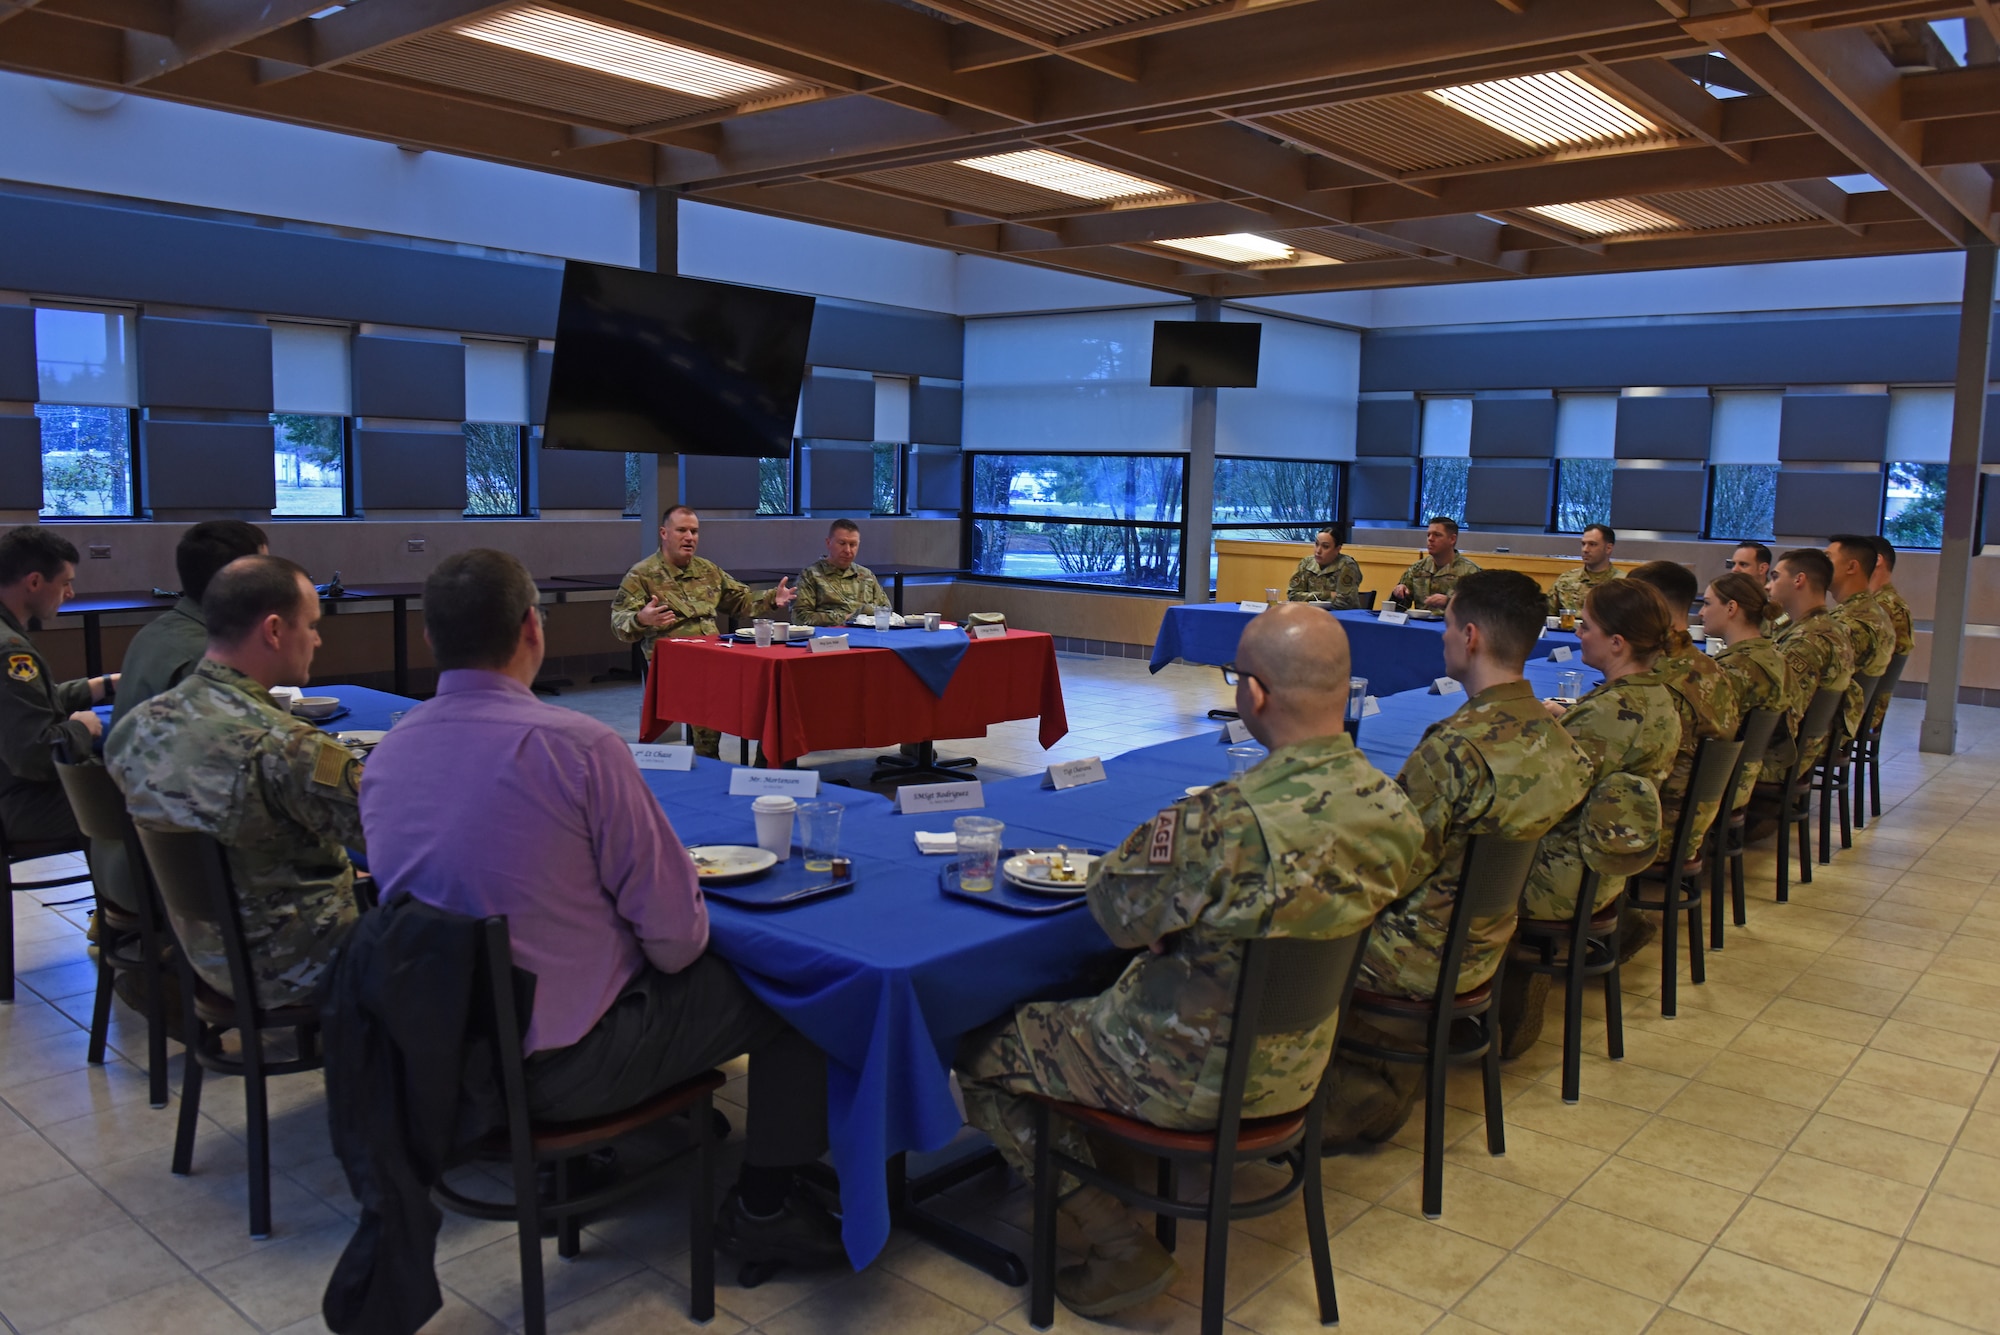 U.S. Air Force Maj. Gen. Thad Bibb, 18th Air Force commander, and U.S. Air Force Chief Master Sgt. Chad Bickley, 18th AF command chief, engage with Team McChord Airmen during a breakfast engagement at Joint Base Lewis-McChord, Washington, March, 15, 2022. The Airmen received the opportunity to be mentored by 18th AF leadership and to ask any questions they had. (U.S. Air Force photo/Senior Airman Zoe Thacker)